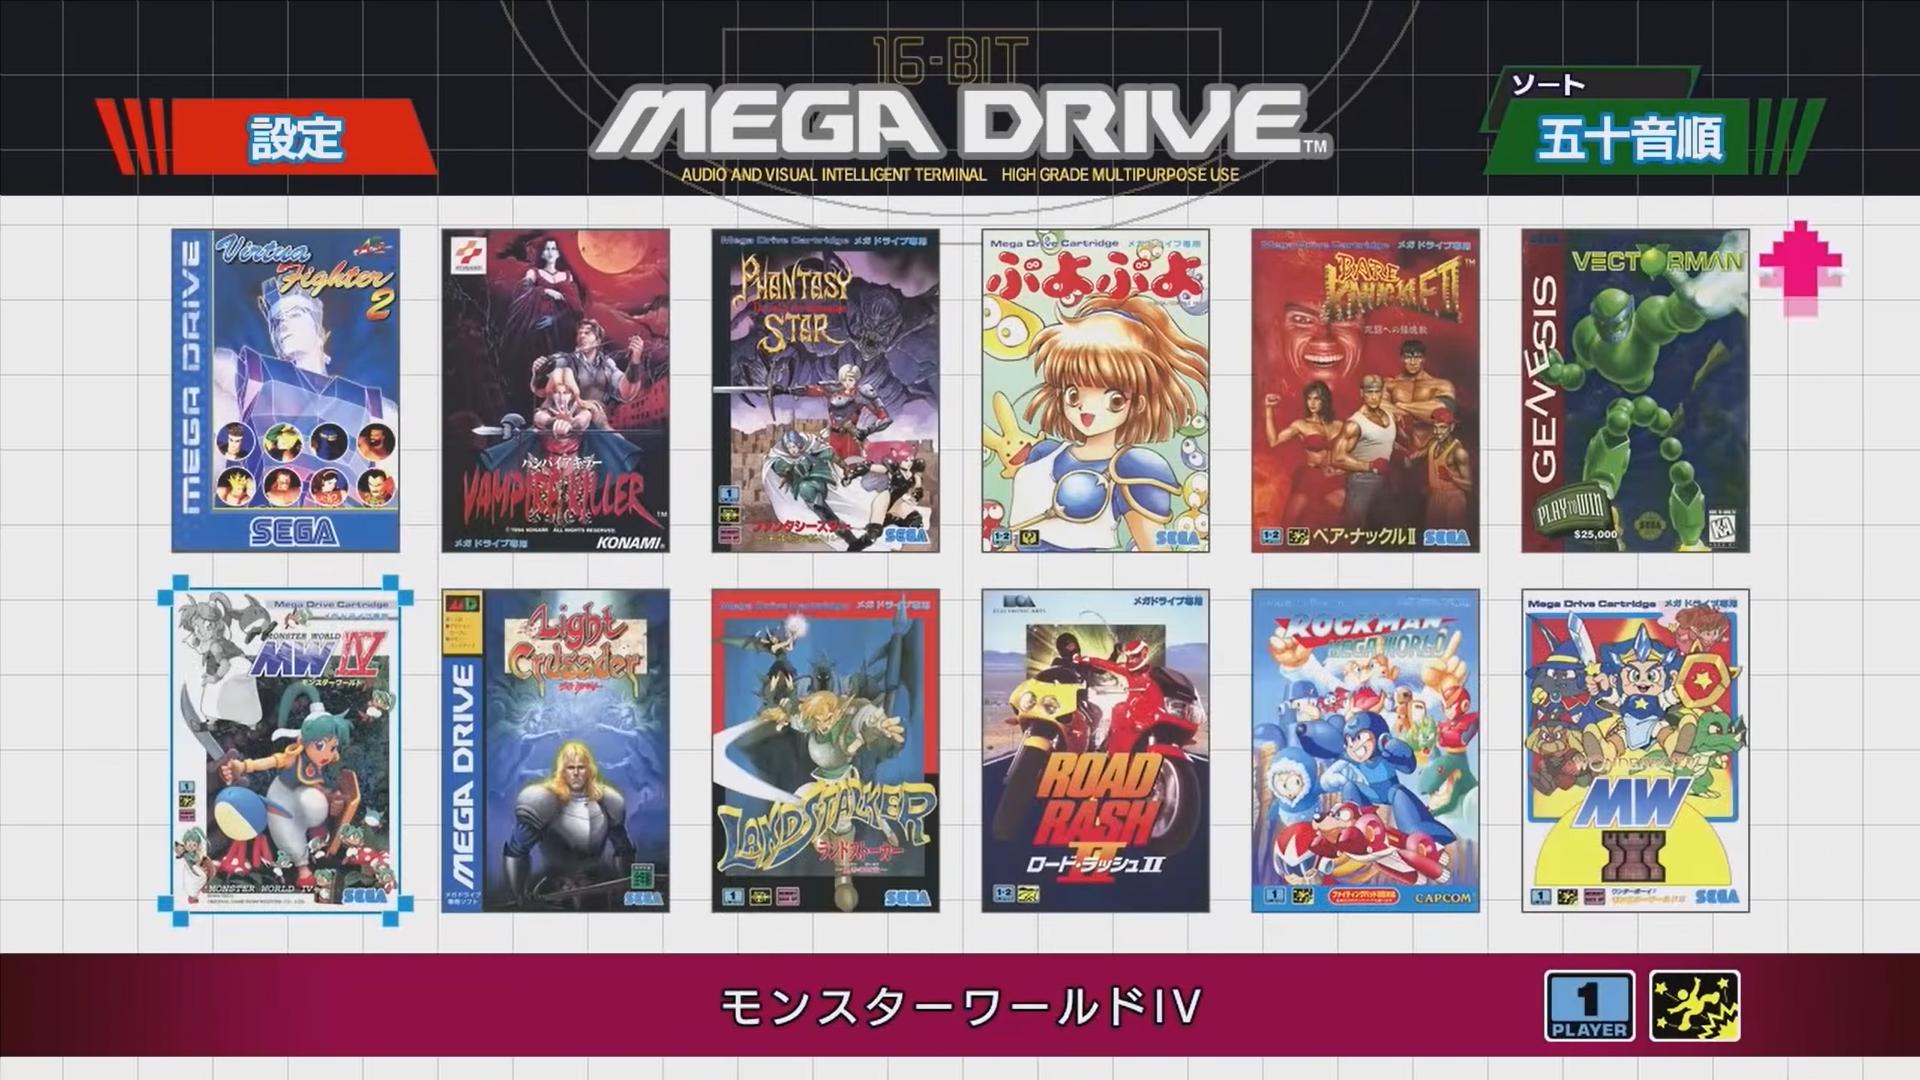 Sega 2 Days Left Until Fans Can Get Their Hands On The Genesis Mini Did You Know By Changing The Language On The Genesis Mini Or Mega Drive Mini To